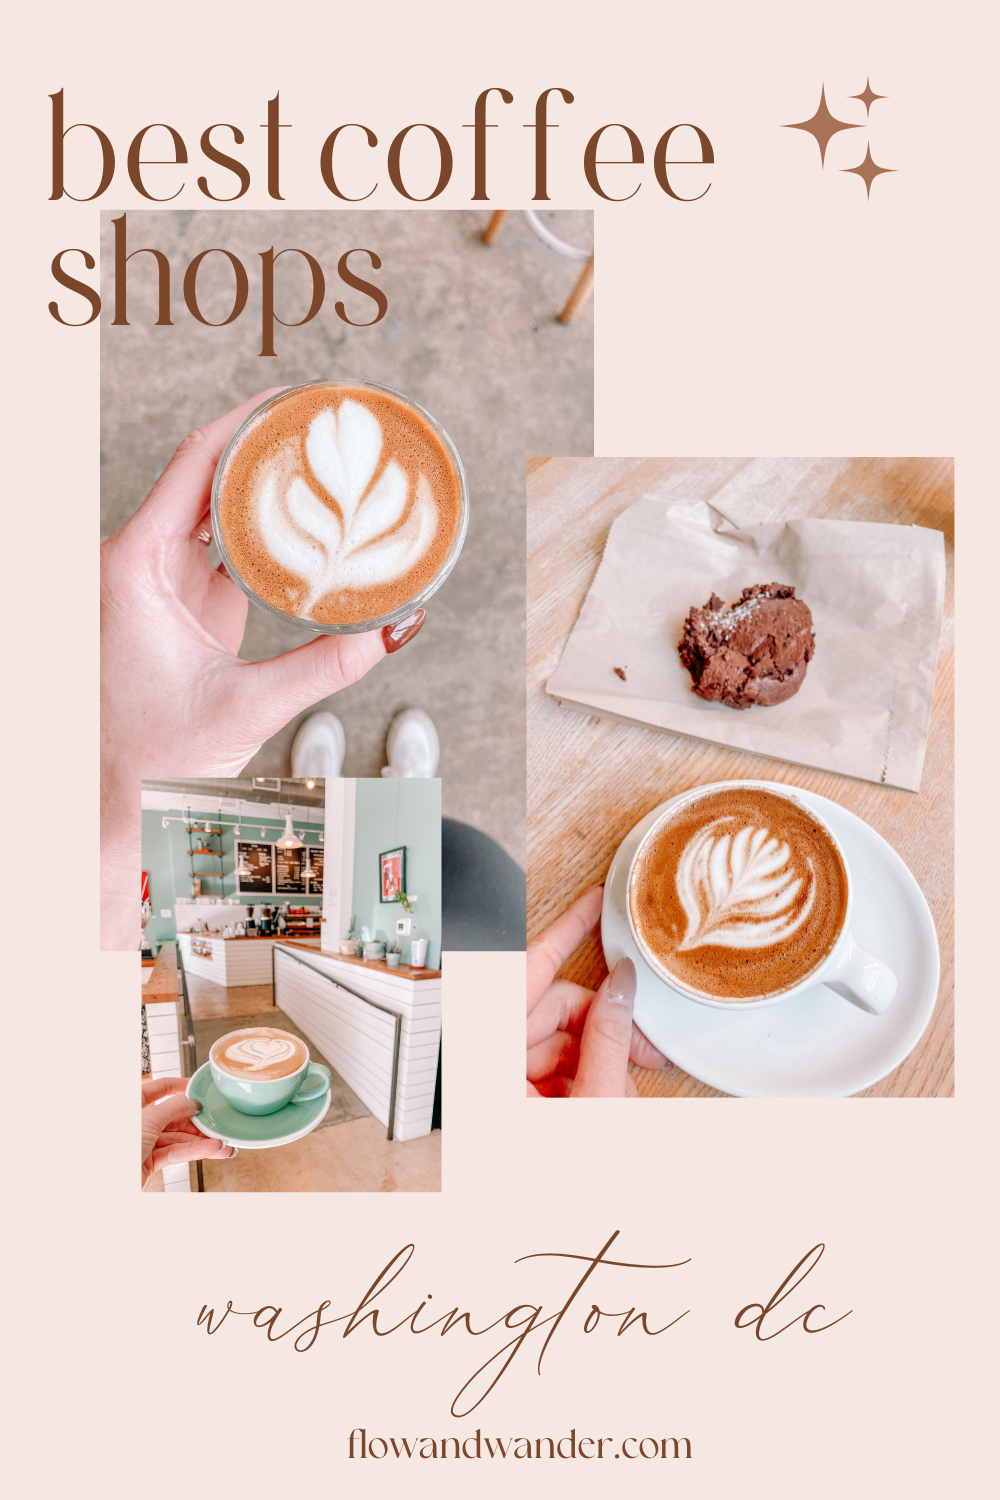 best coffee shops washington dc graphic3.png